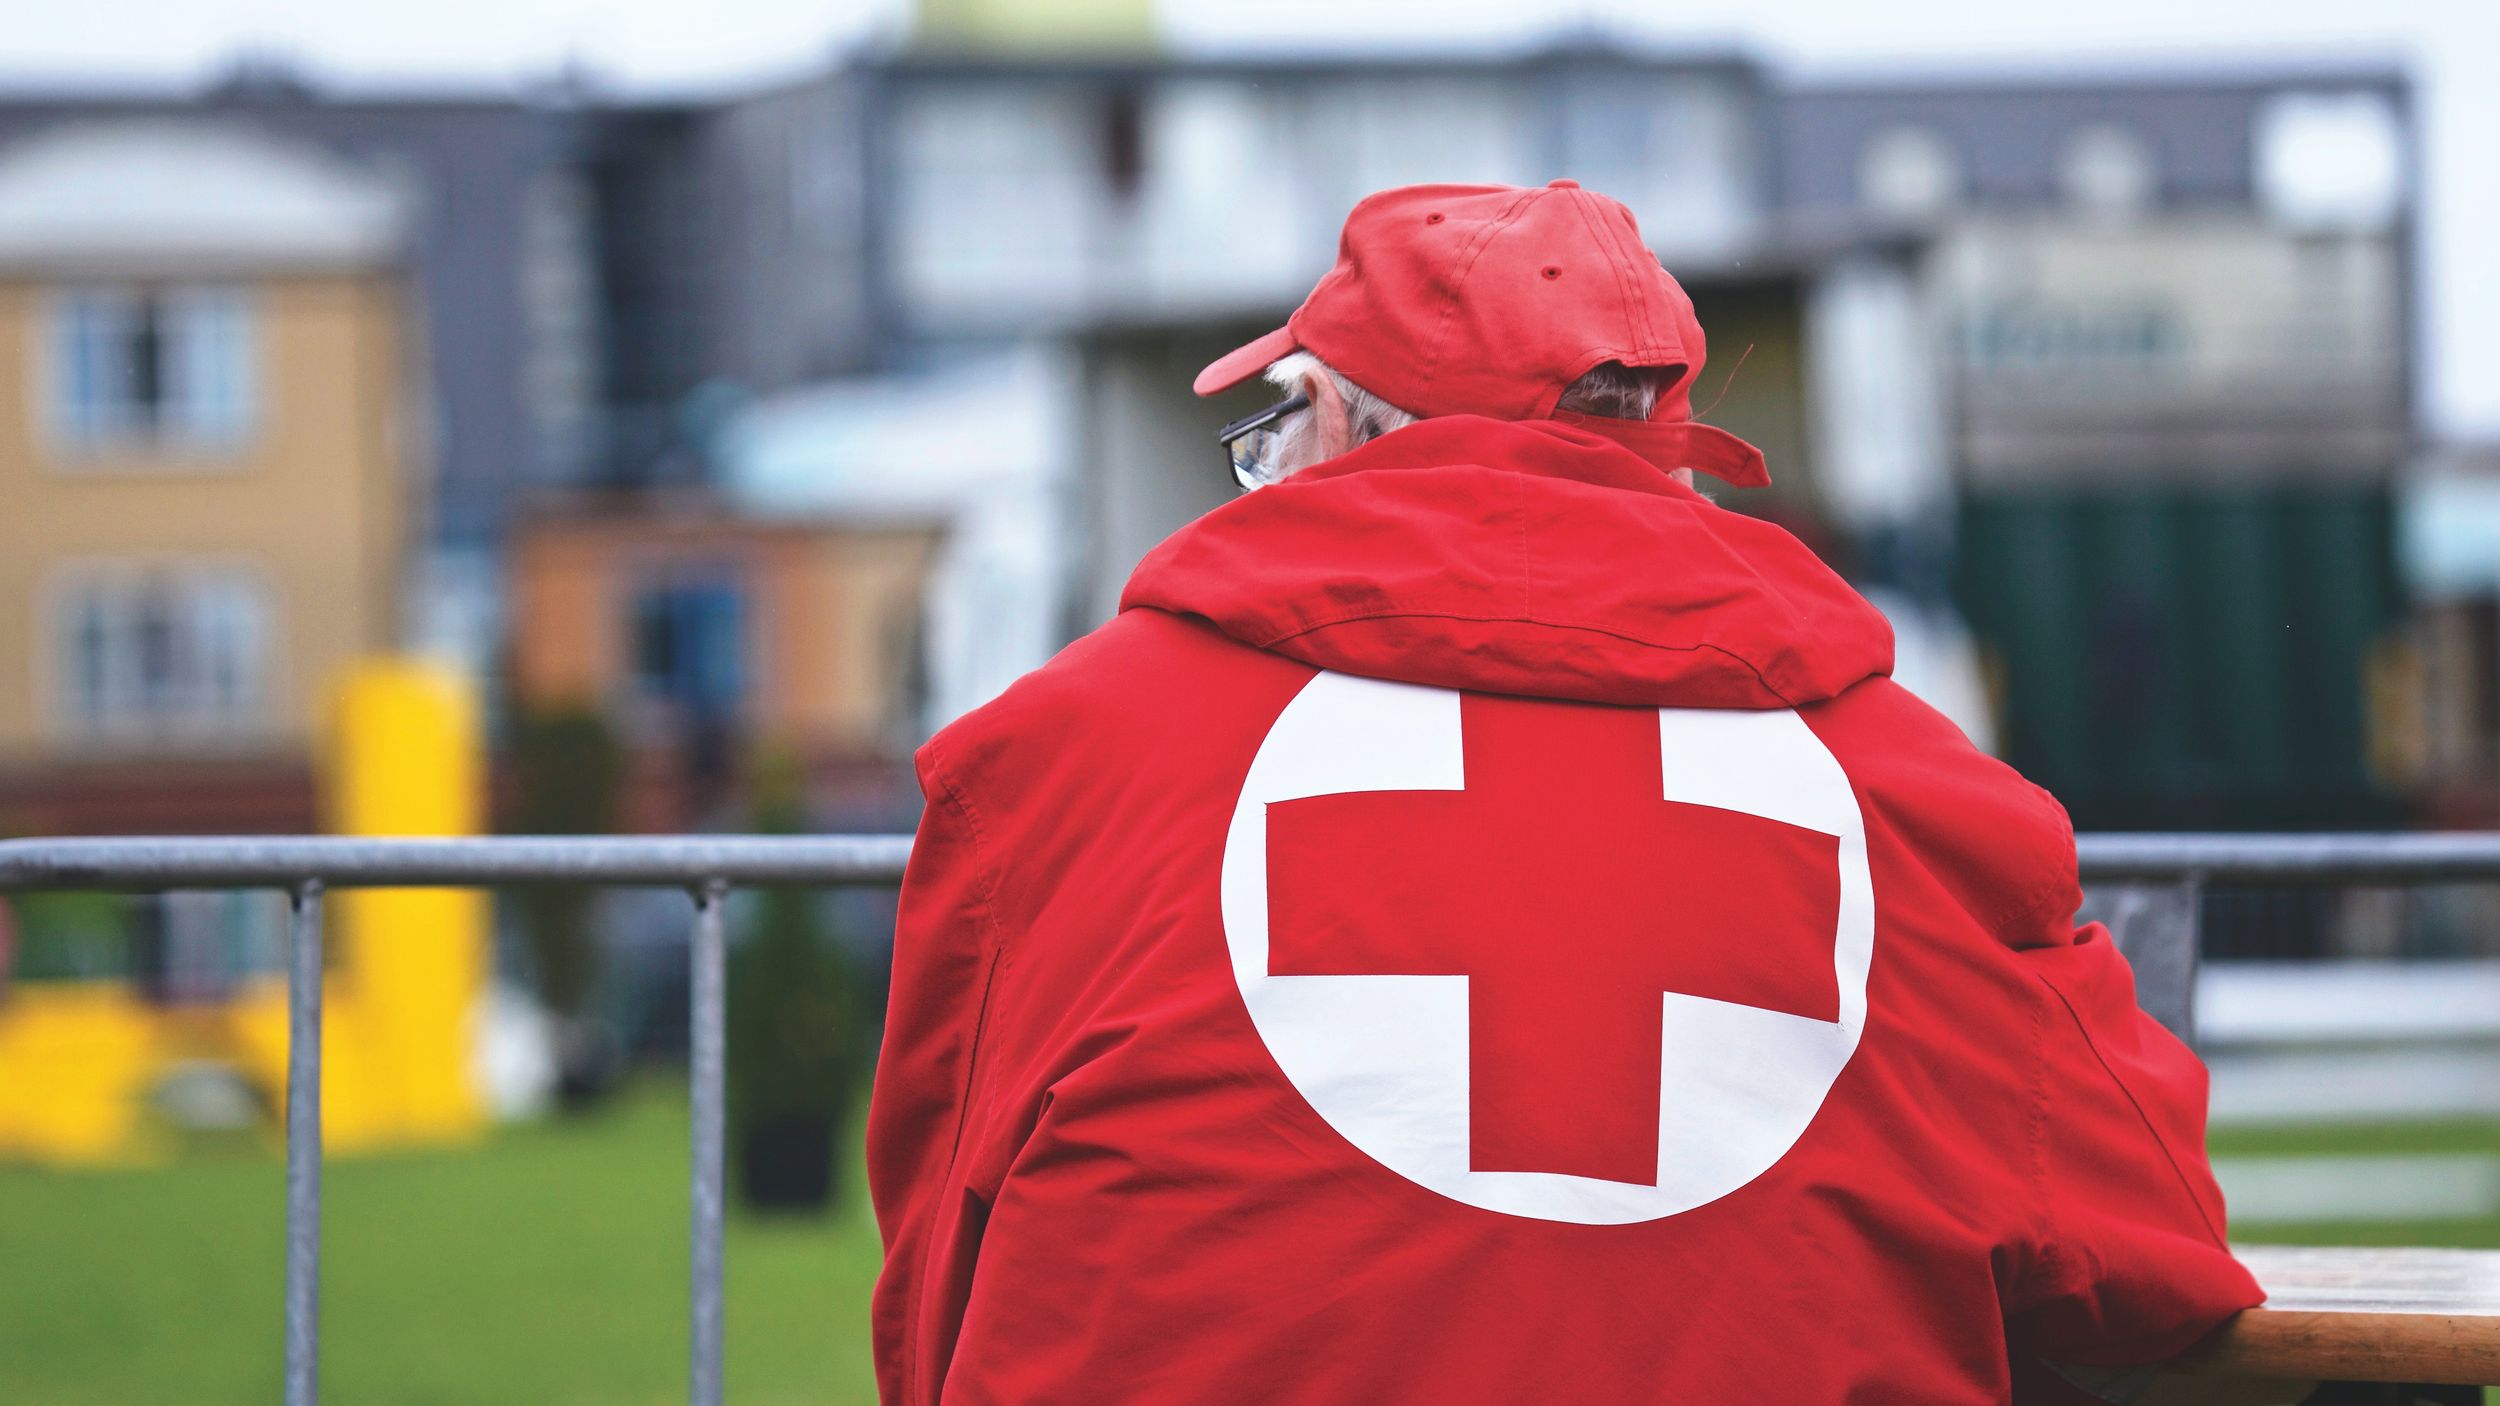 Man in a red cross jacket stands by a rail.